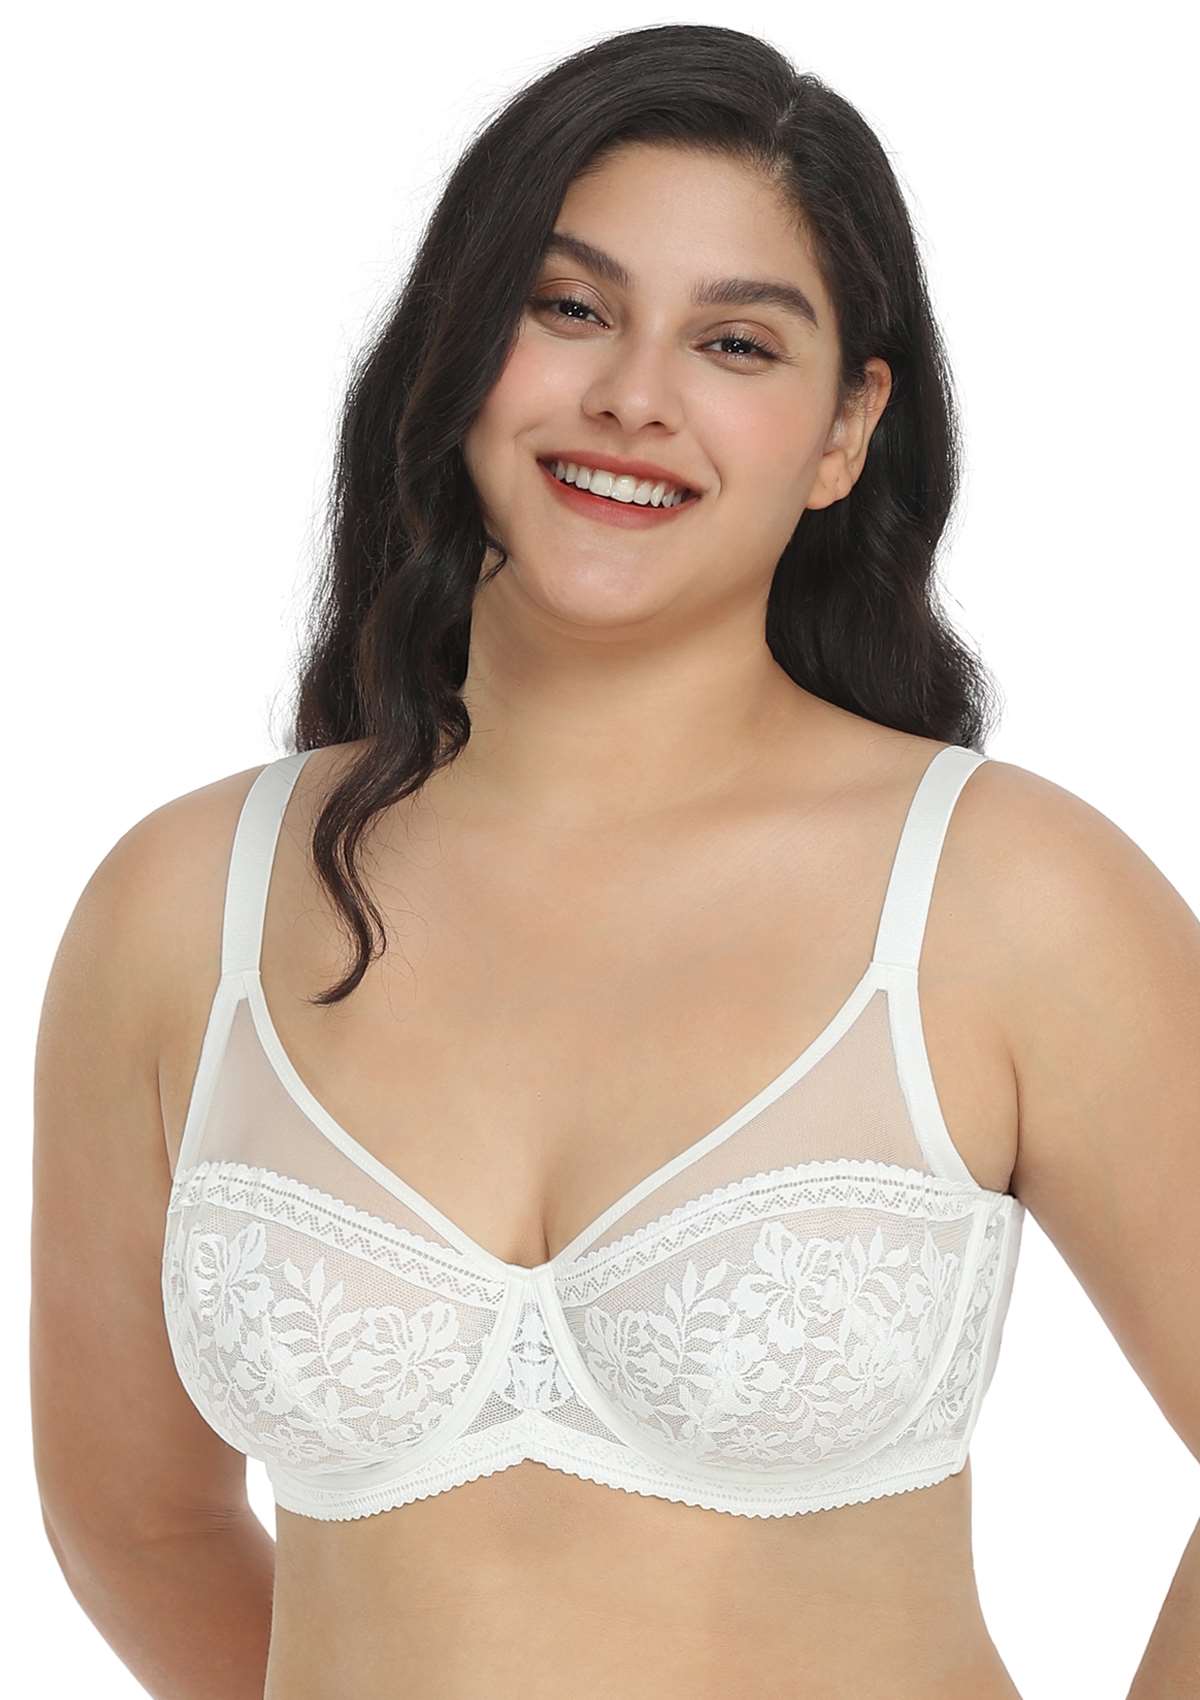 HSIA Gladioli Lace Mesh Minimizing Unlined Underwire Bra For Fuller Busts - White / 44 / C